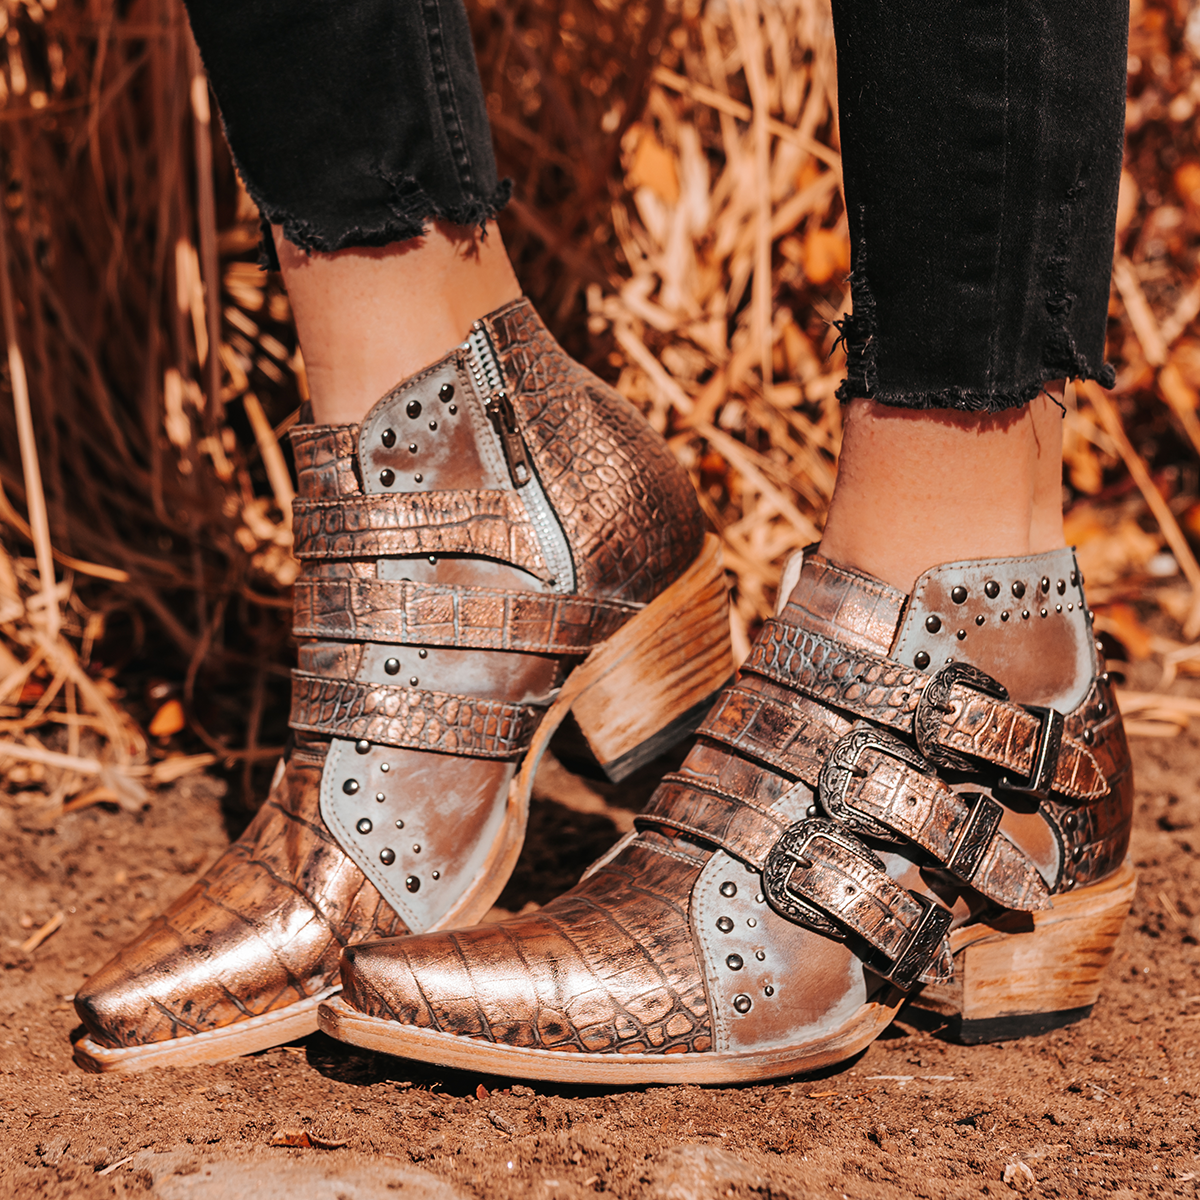 FREEBIRD women's WHILHELMINA blush croco ankle bootie featuring engraved metal buckles, snip toe, and embellished stud detailing